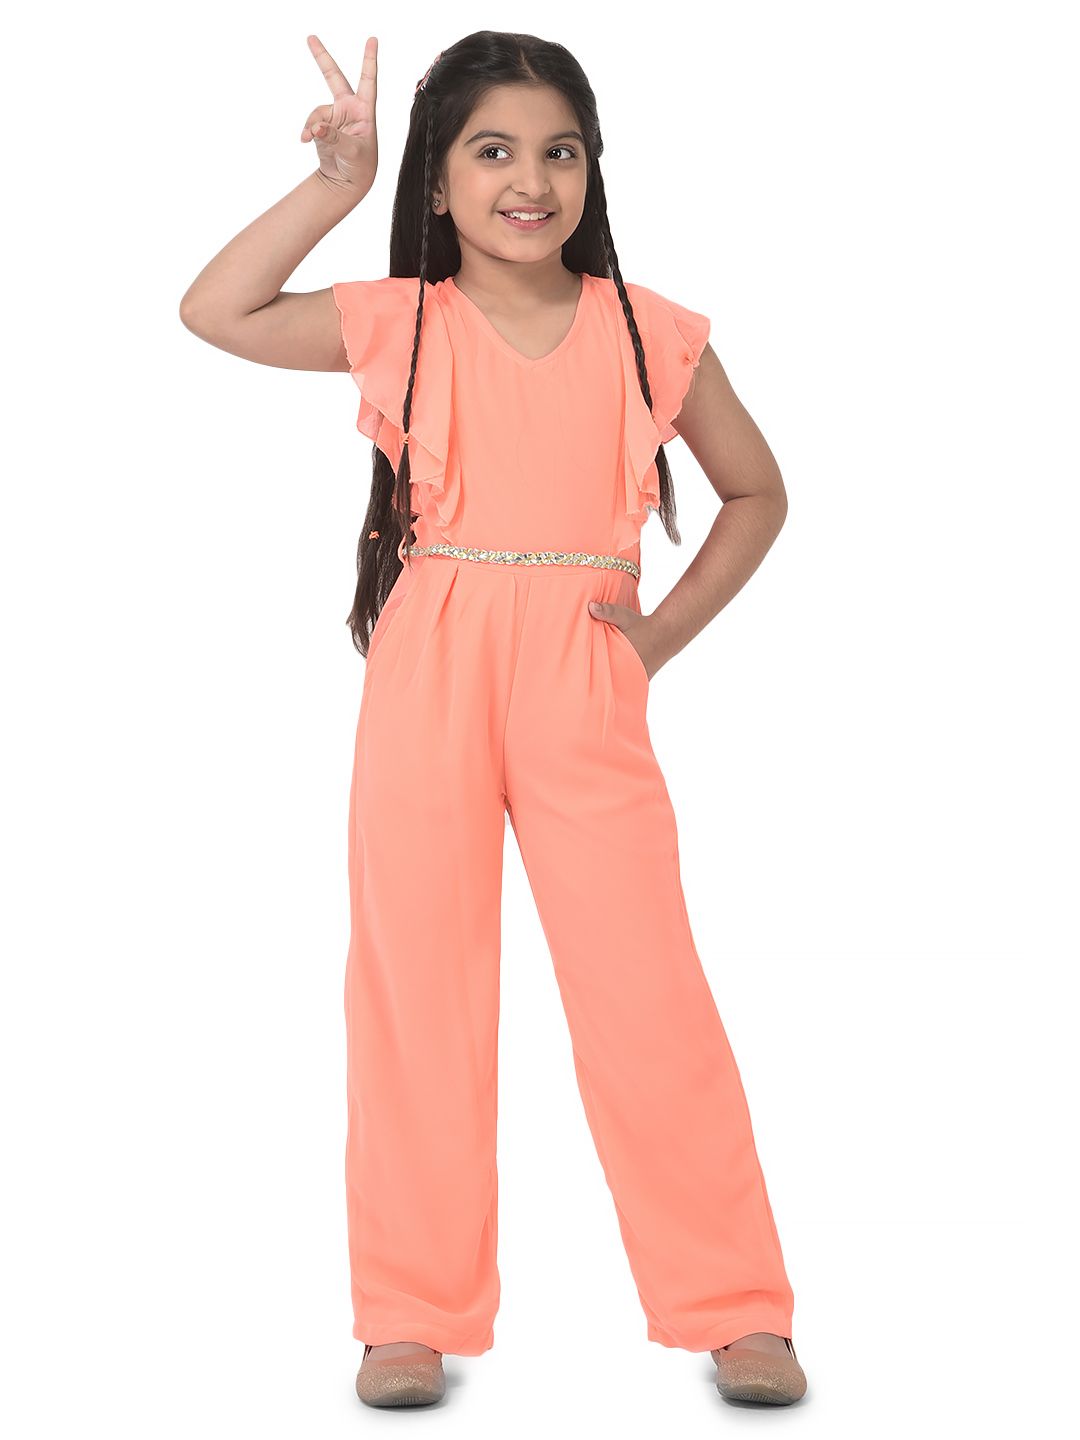 Update more than 175 jumpsuit for 14 year girl latest